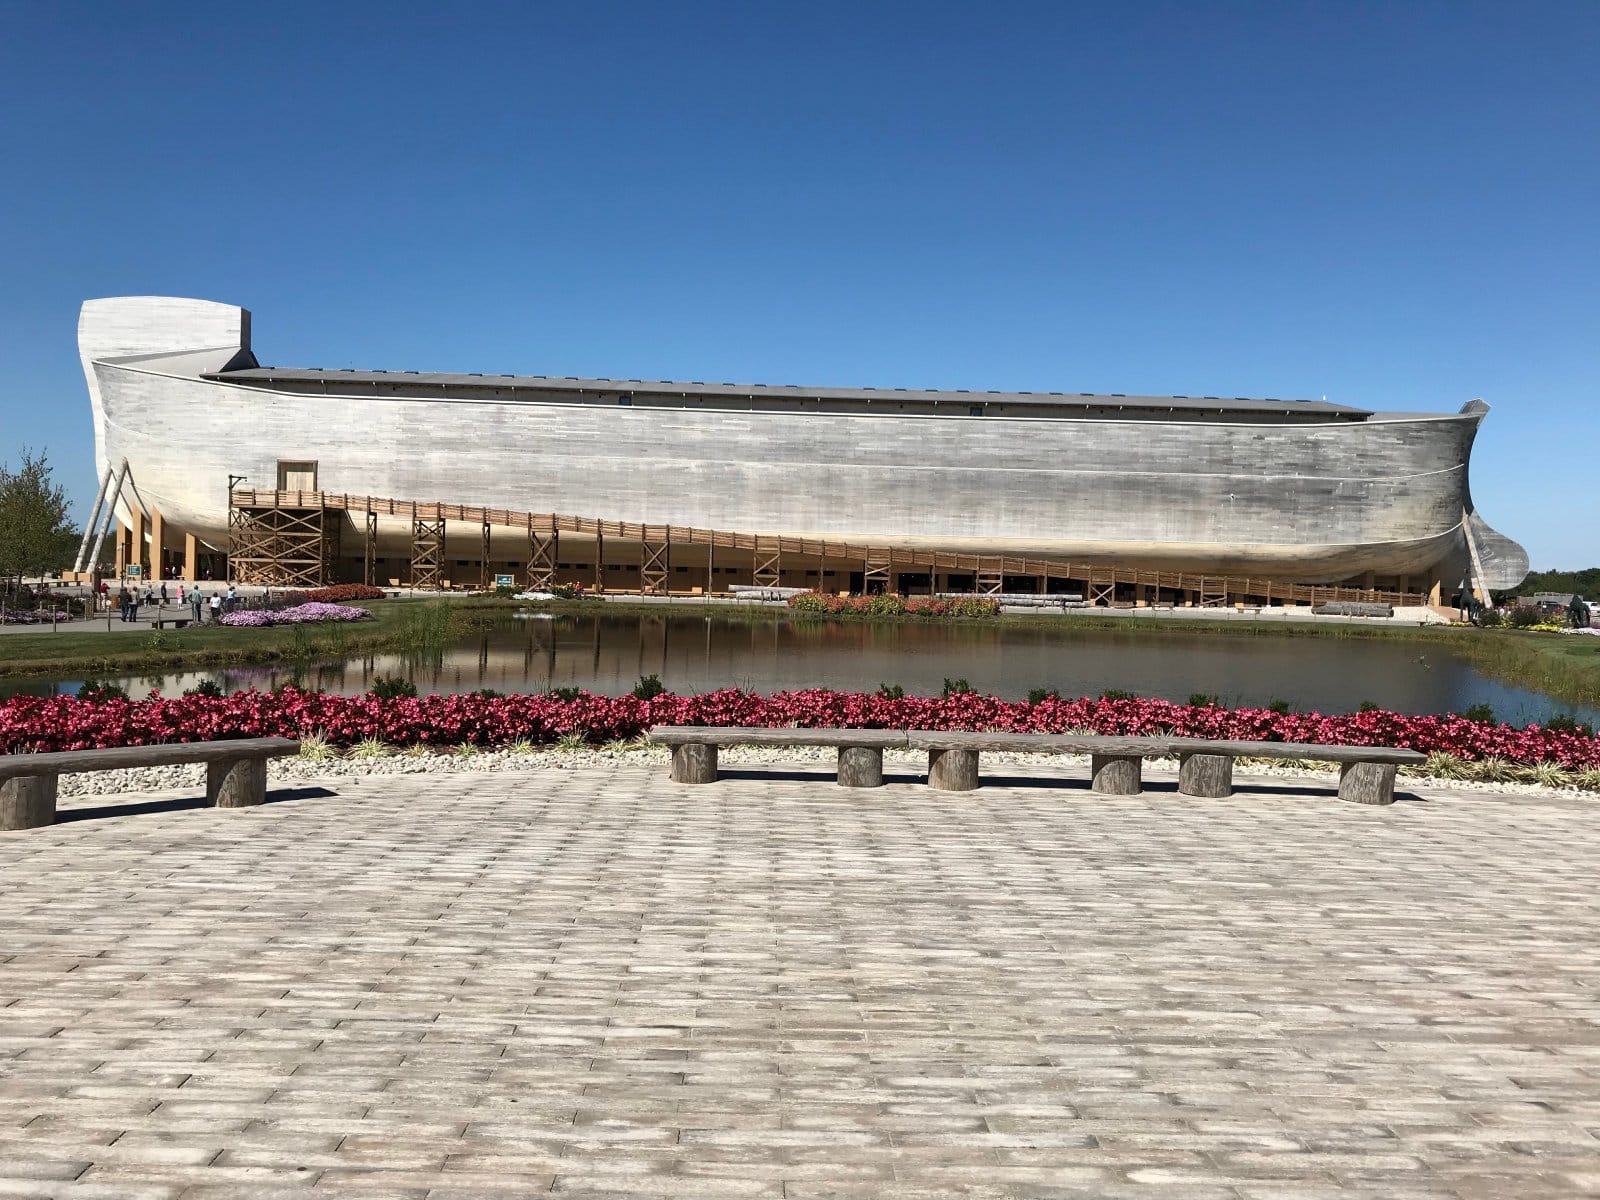 Image Credit: Shutterstock / Lindasj22 <p><span>A life-sized Noah’s Ark stands as the centerpiece of this biblical theme park, offering a tangible walk through a famous biblical narrative and sparking imagination and discussion among its visitors.</span></p>